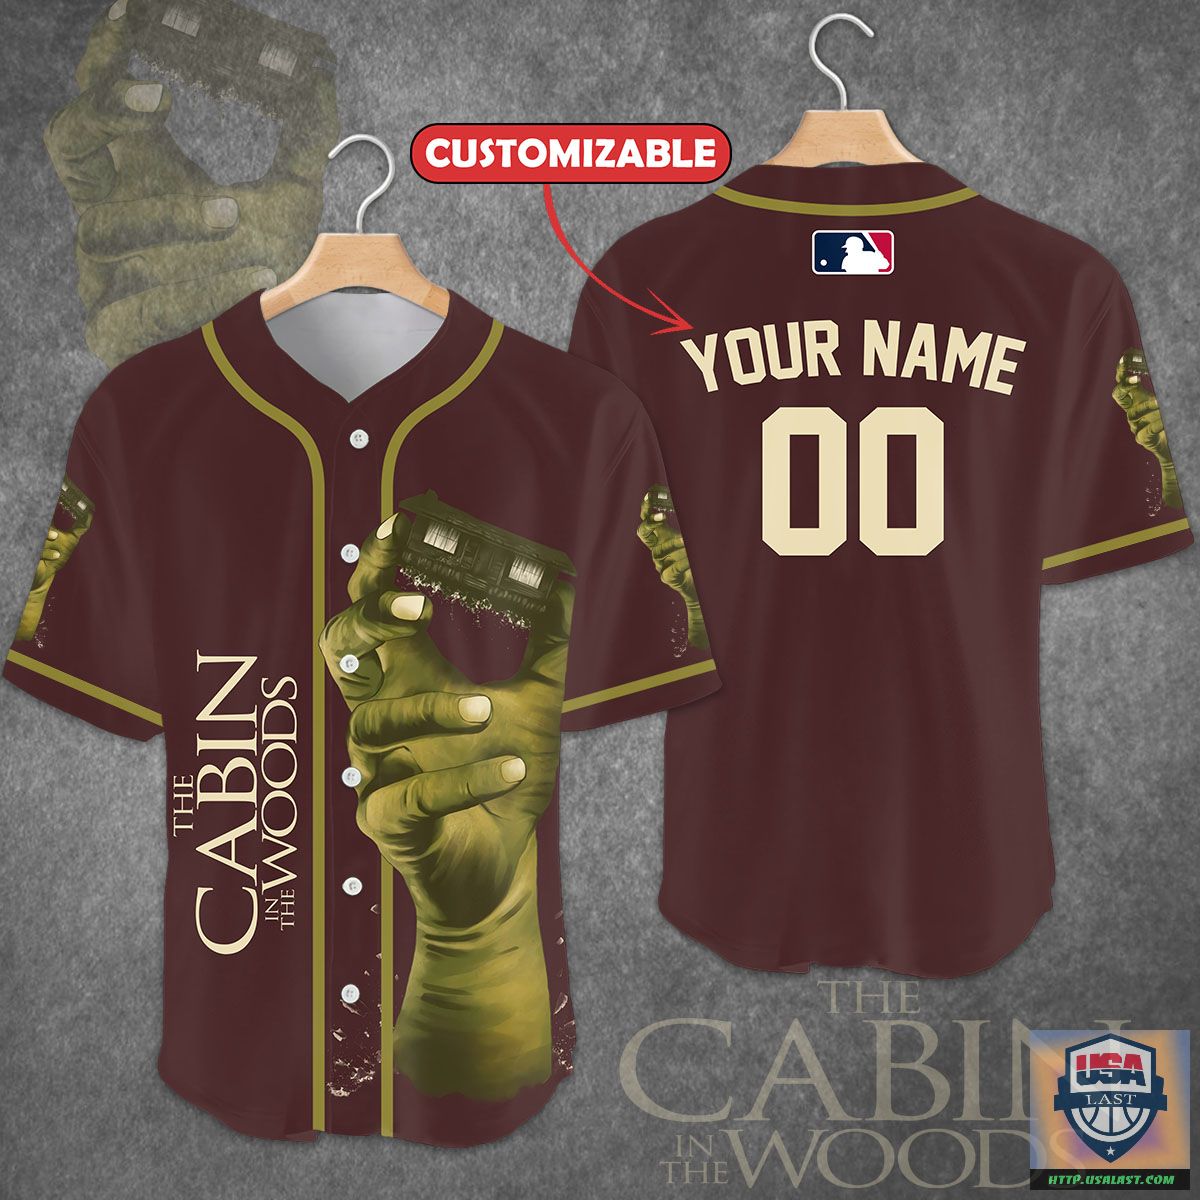 The Cabin In The Woods Personalized Baseball Jersey Shirt – Usalast